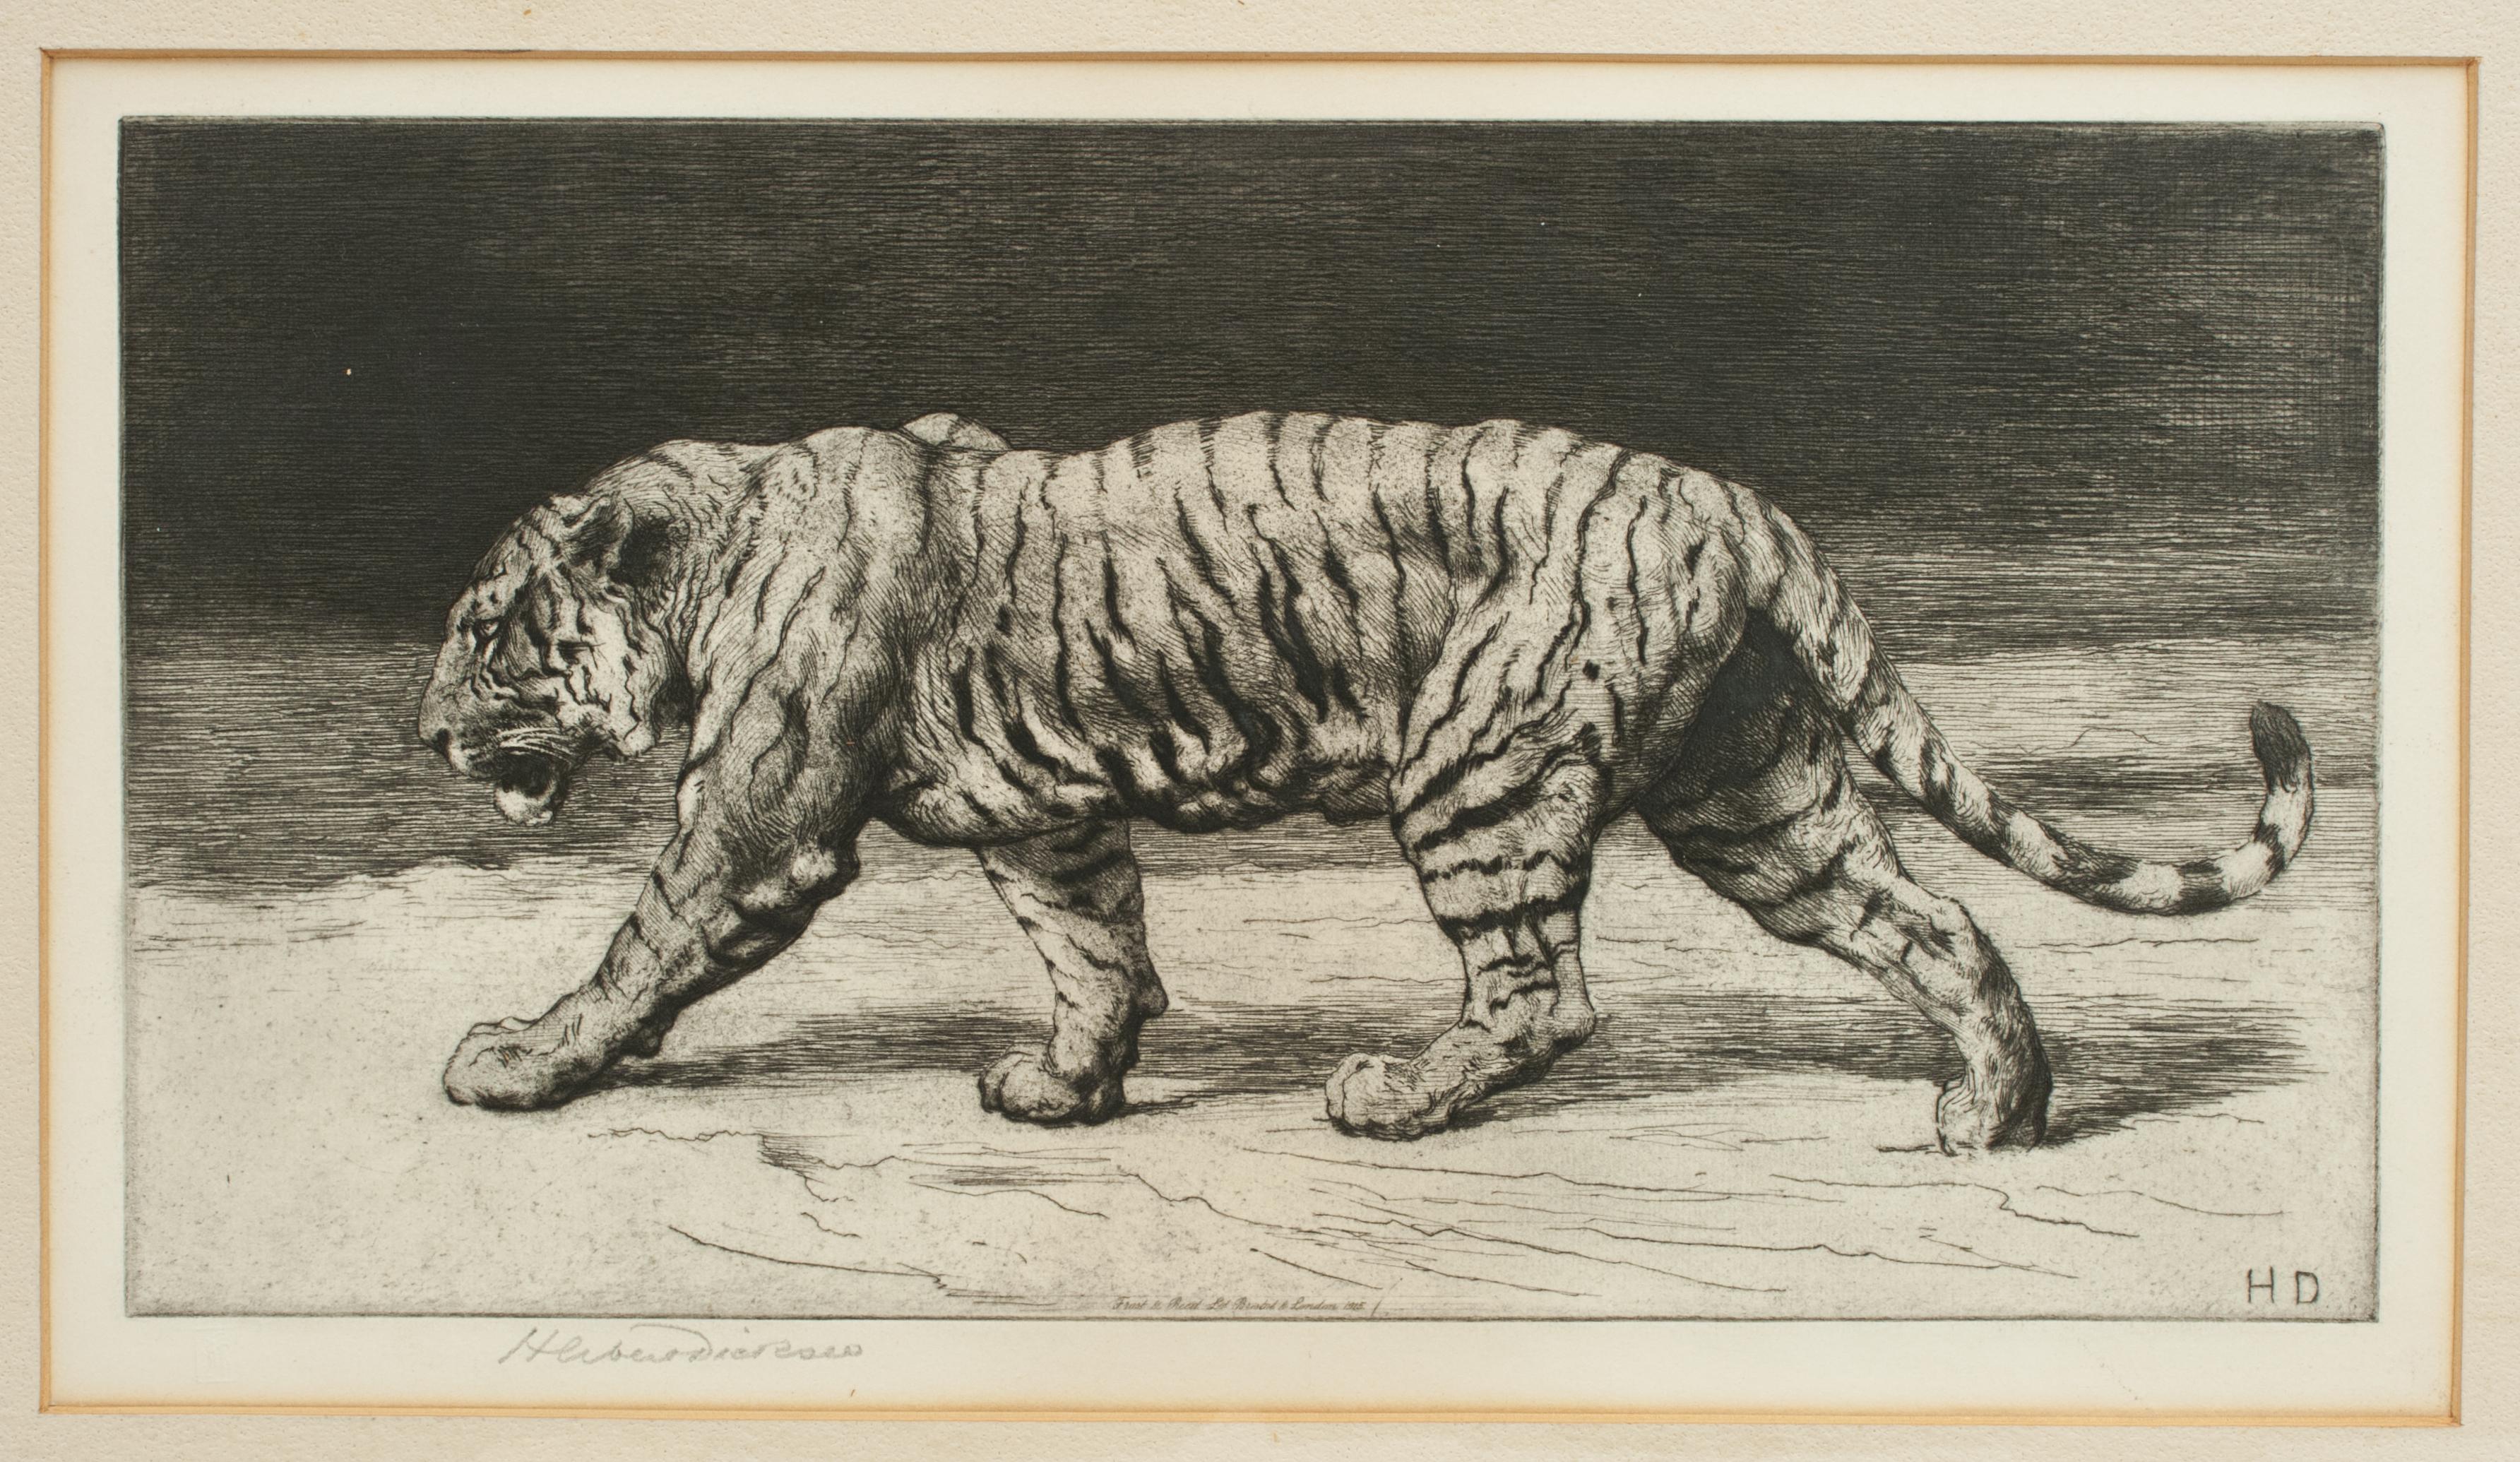 English Prowling Tiger by Herbert Dicksee 1915, Etching, Signed in Pencil